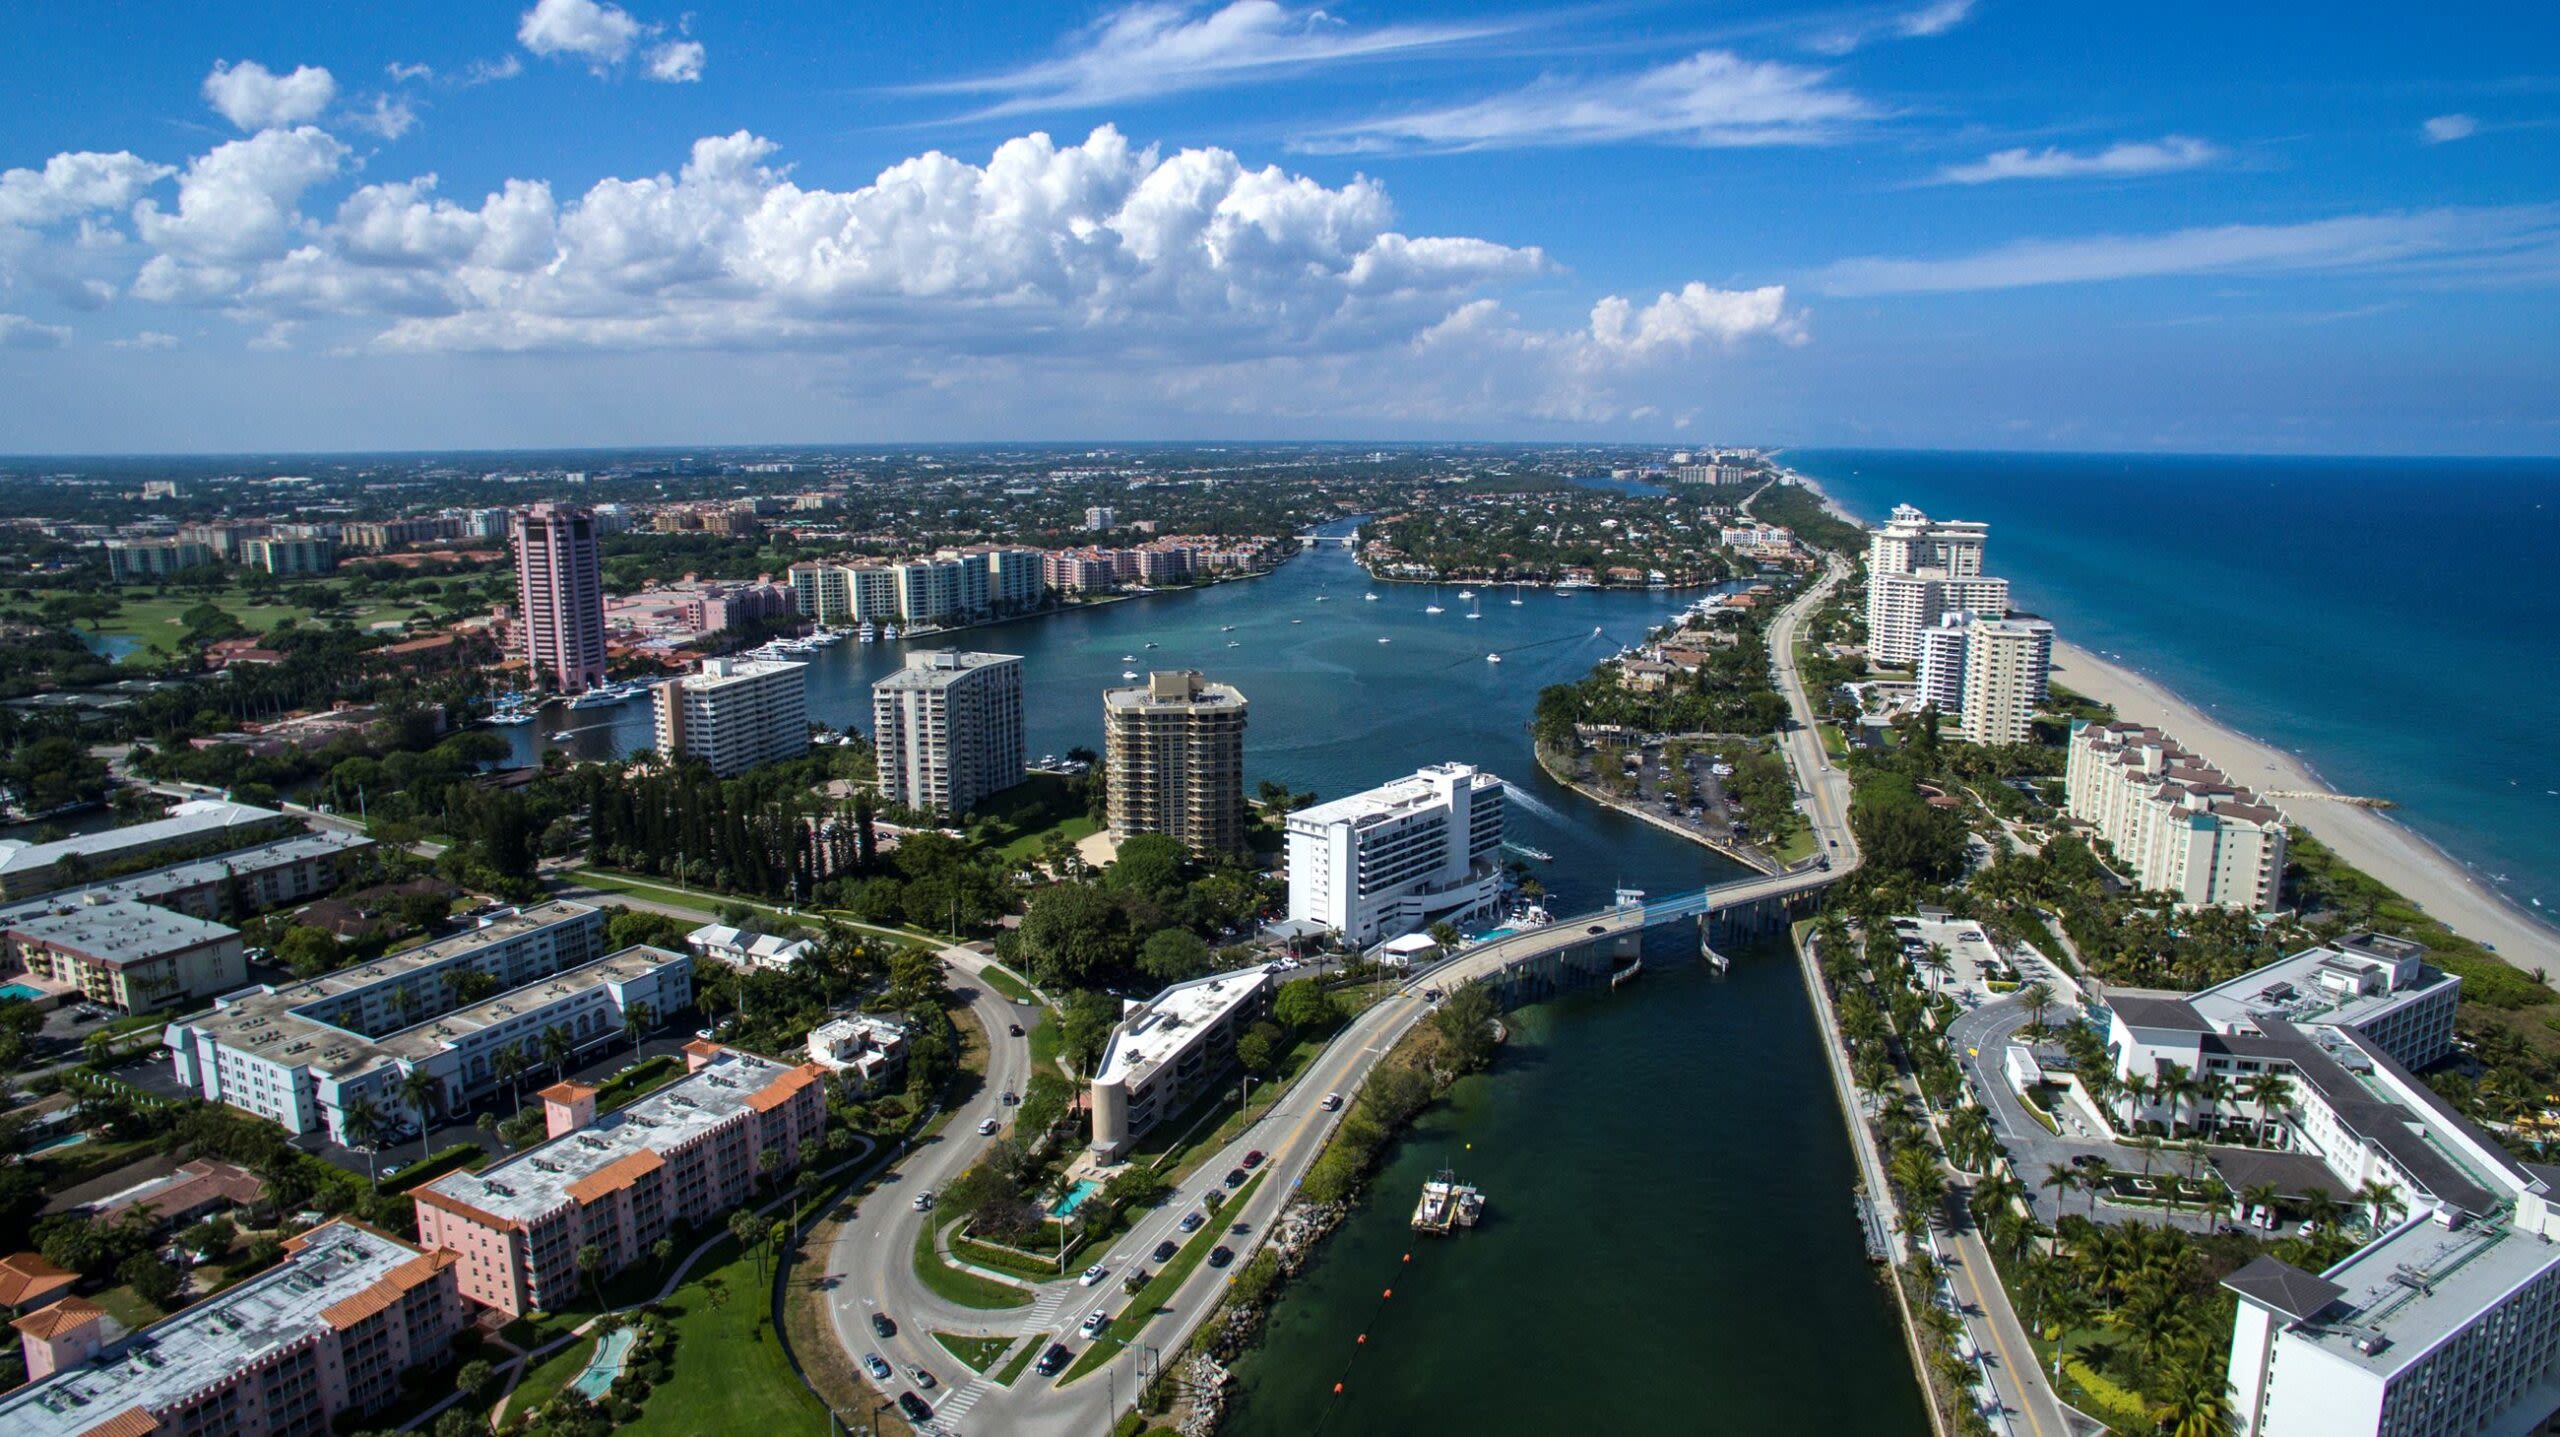 Where's the love? No Florida cities made Top 200 list for quality of life in U.S.